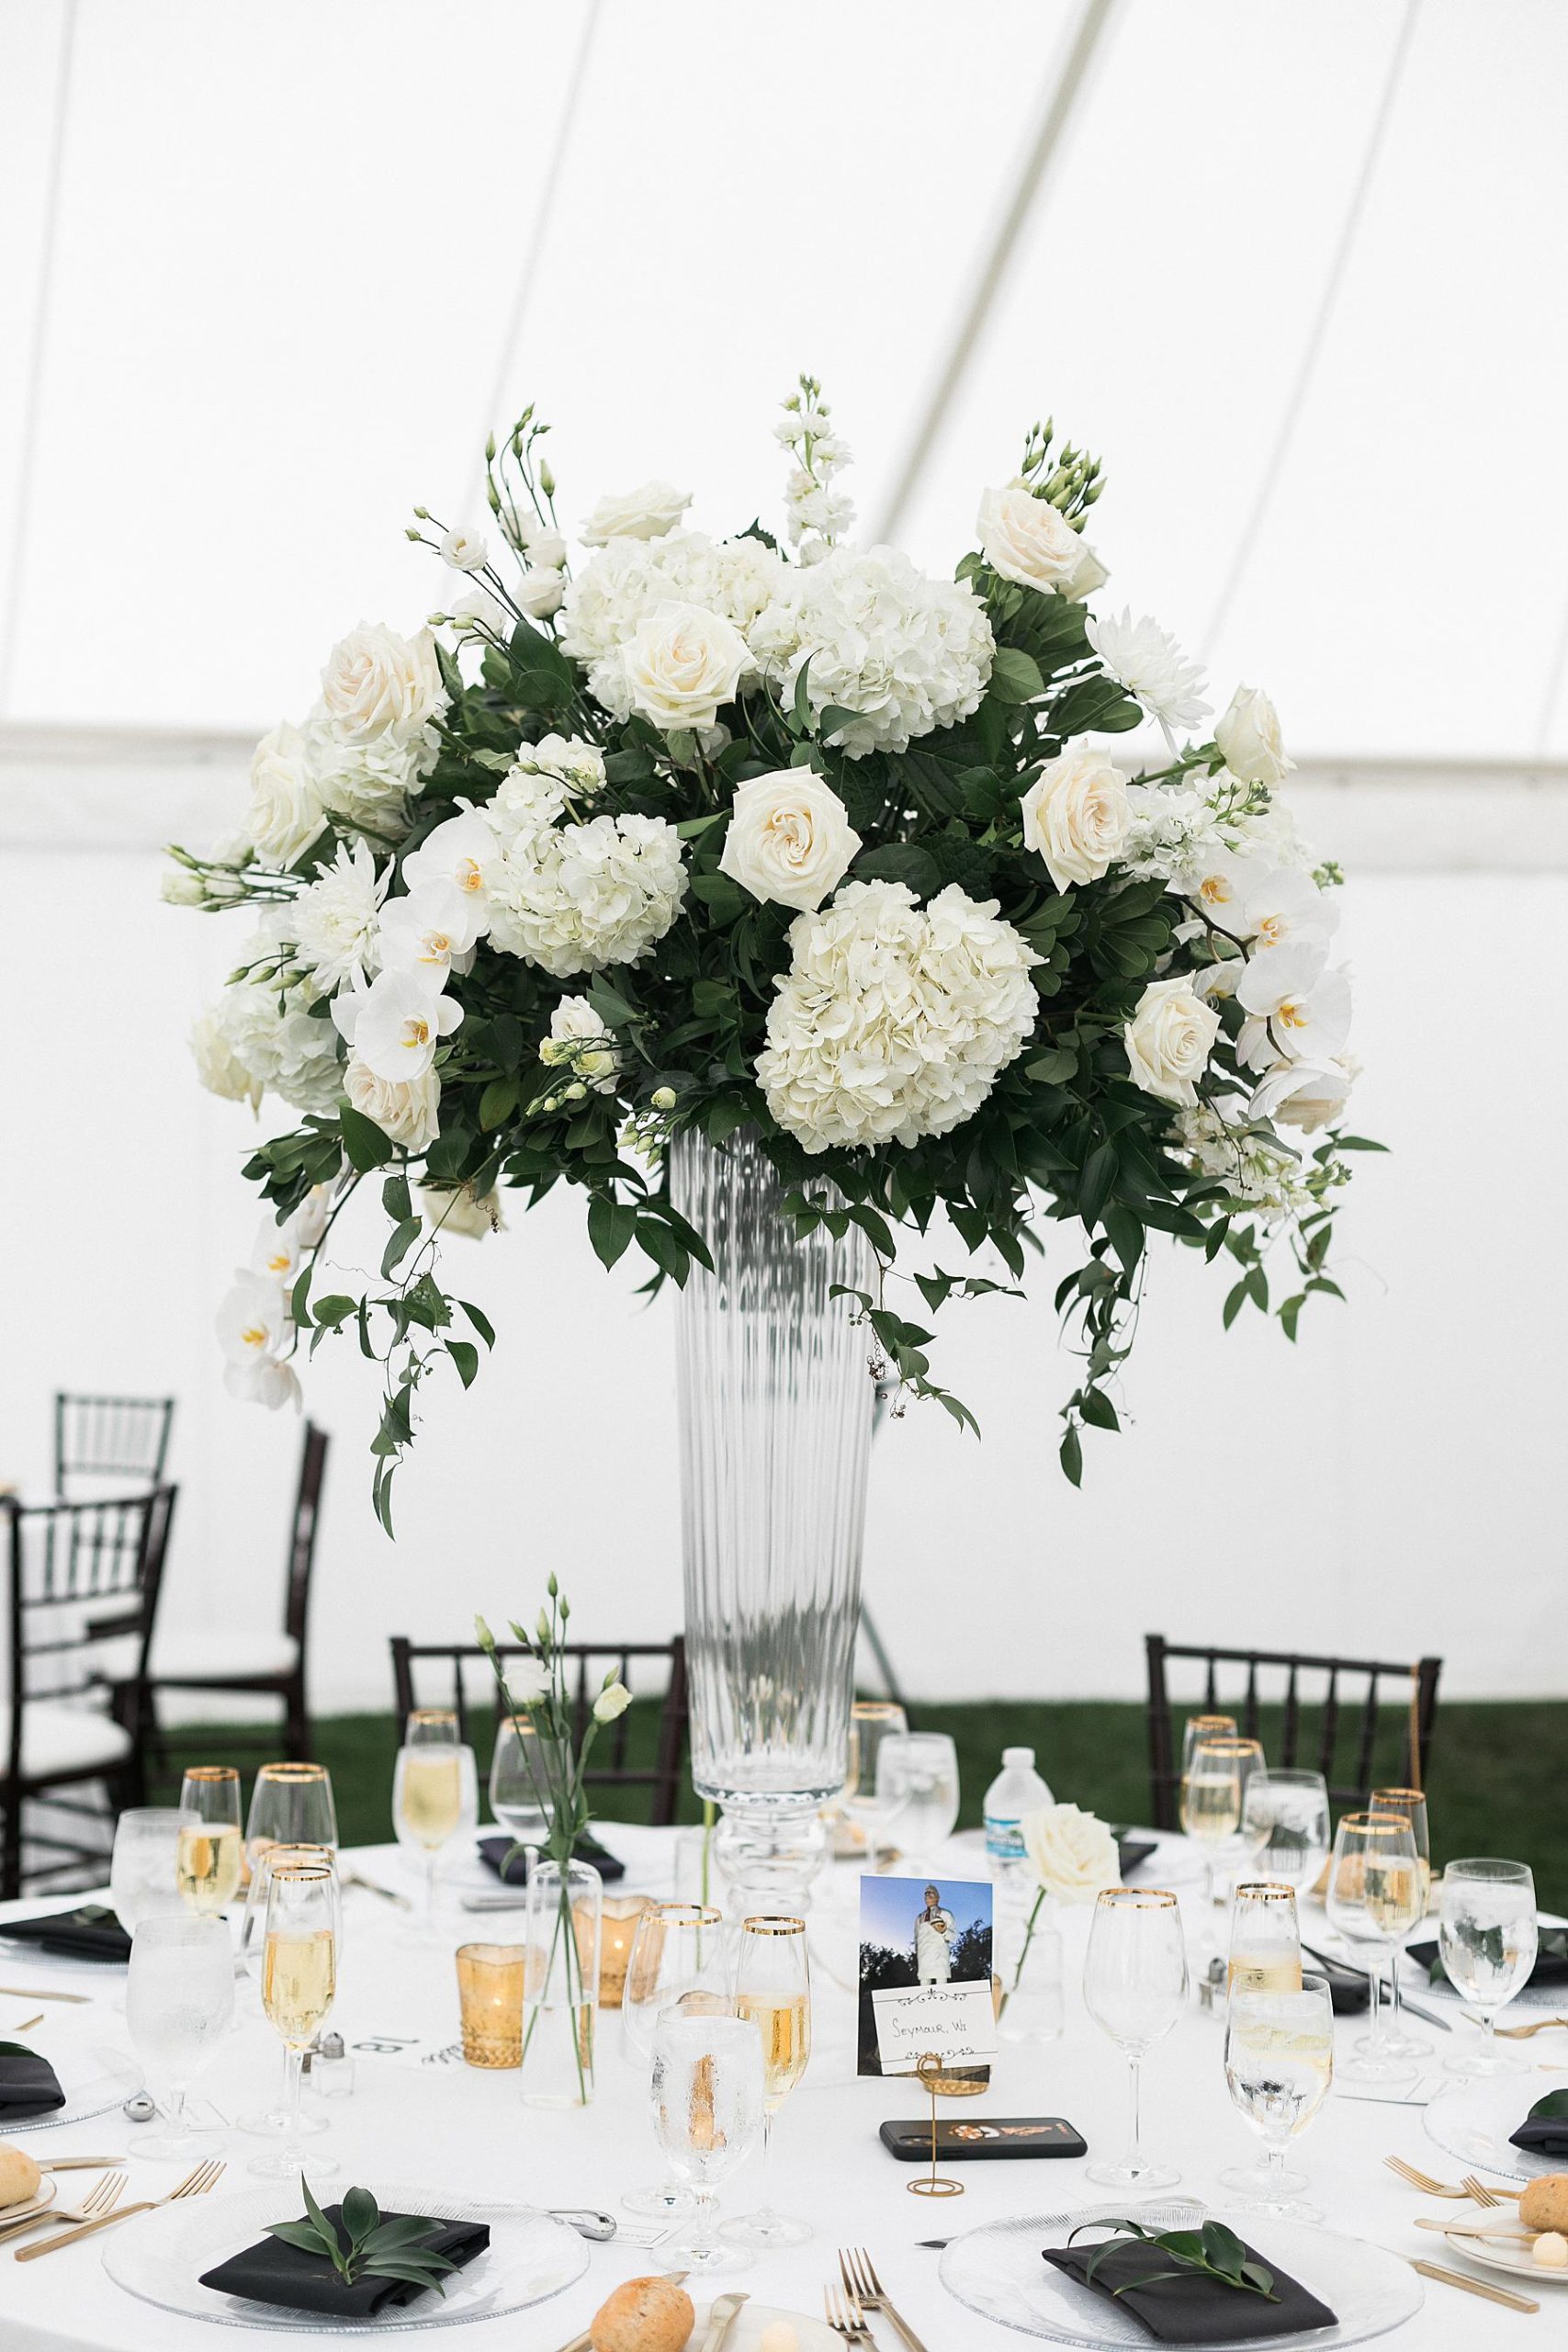 white flower table arrangement at sailcloth tent wedding reception at horseshoe bay beach club in door county